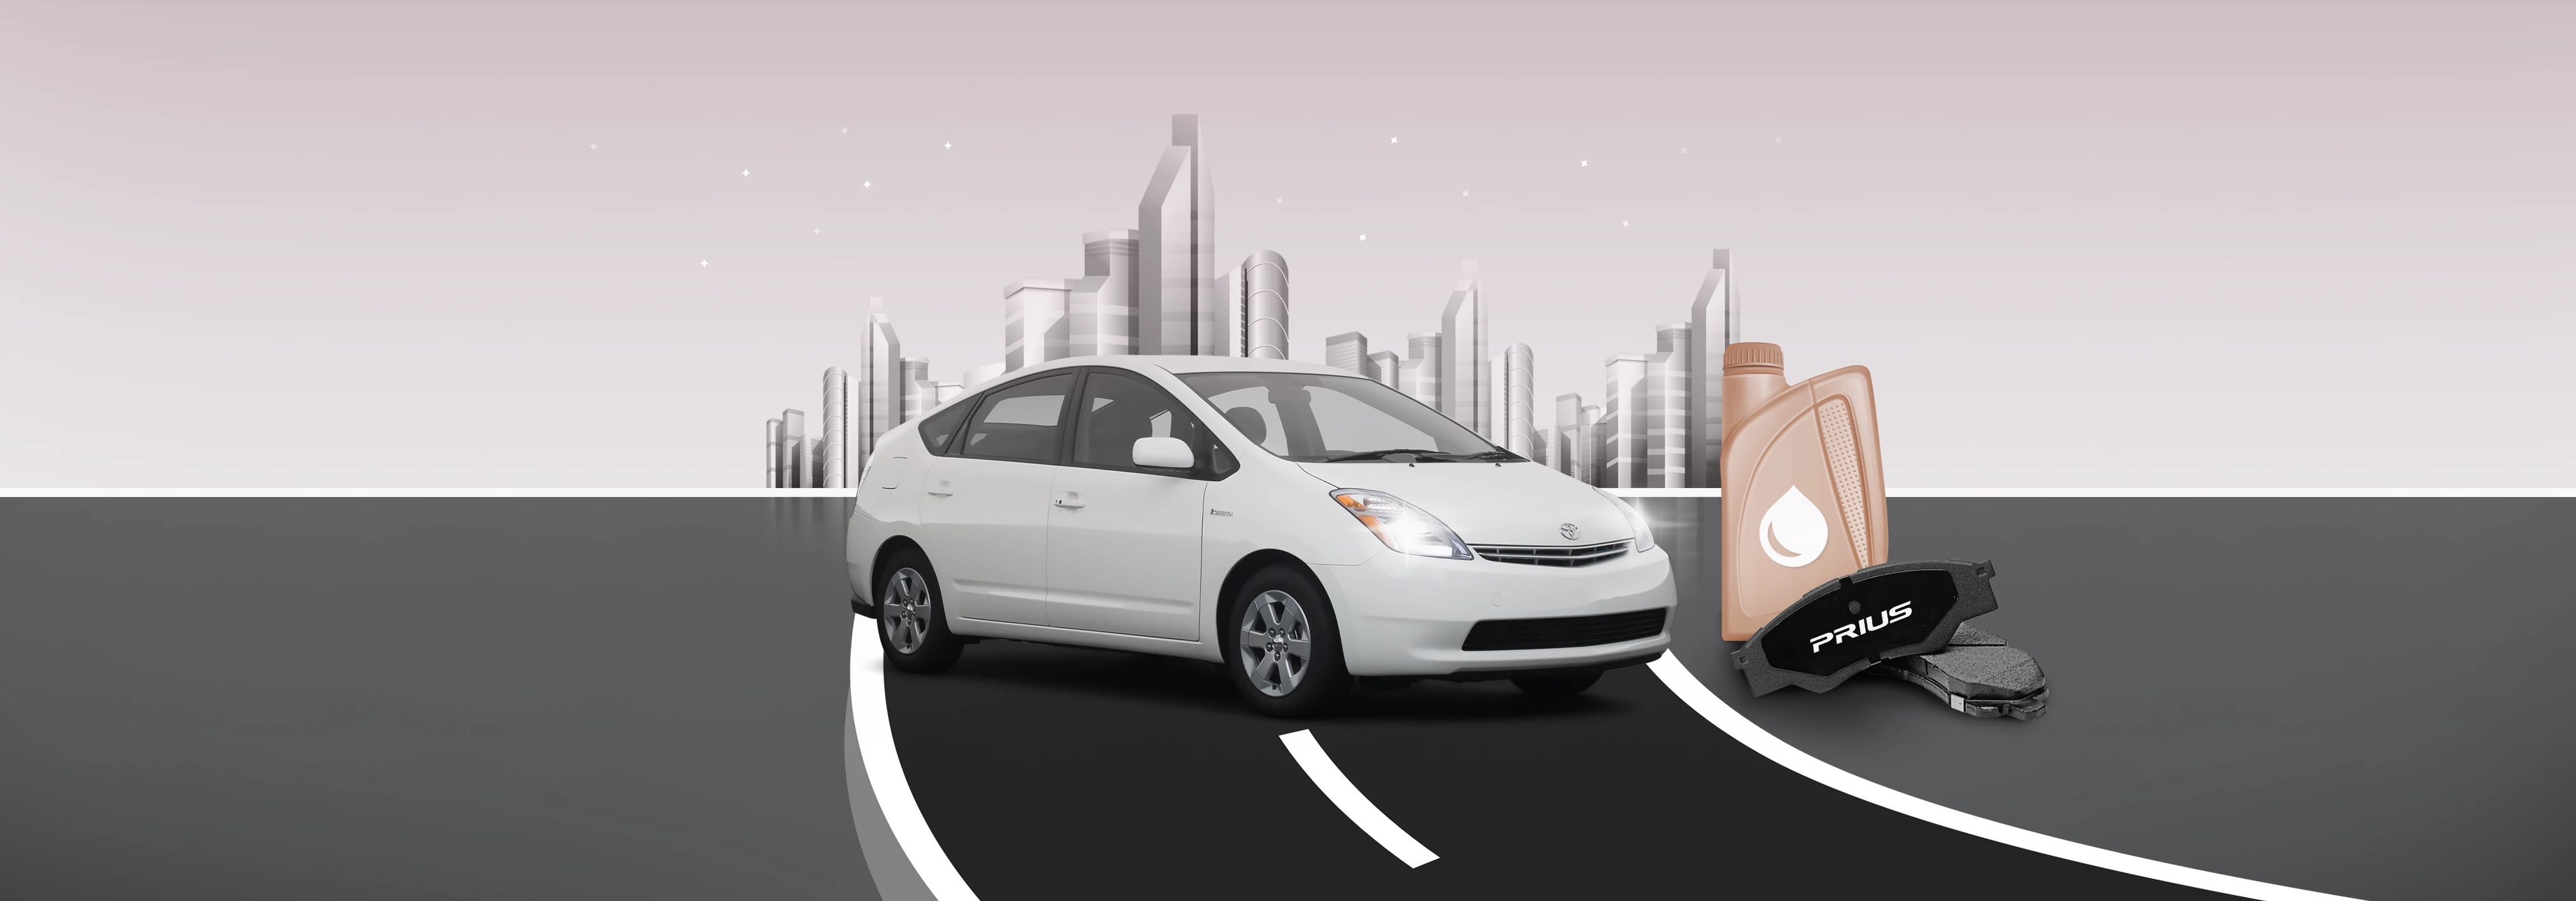 Offer Image For Generation II Prius